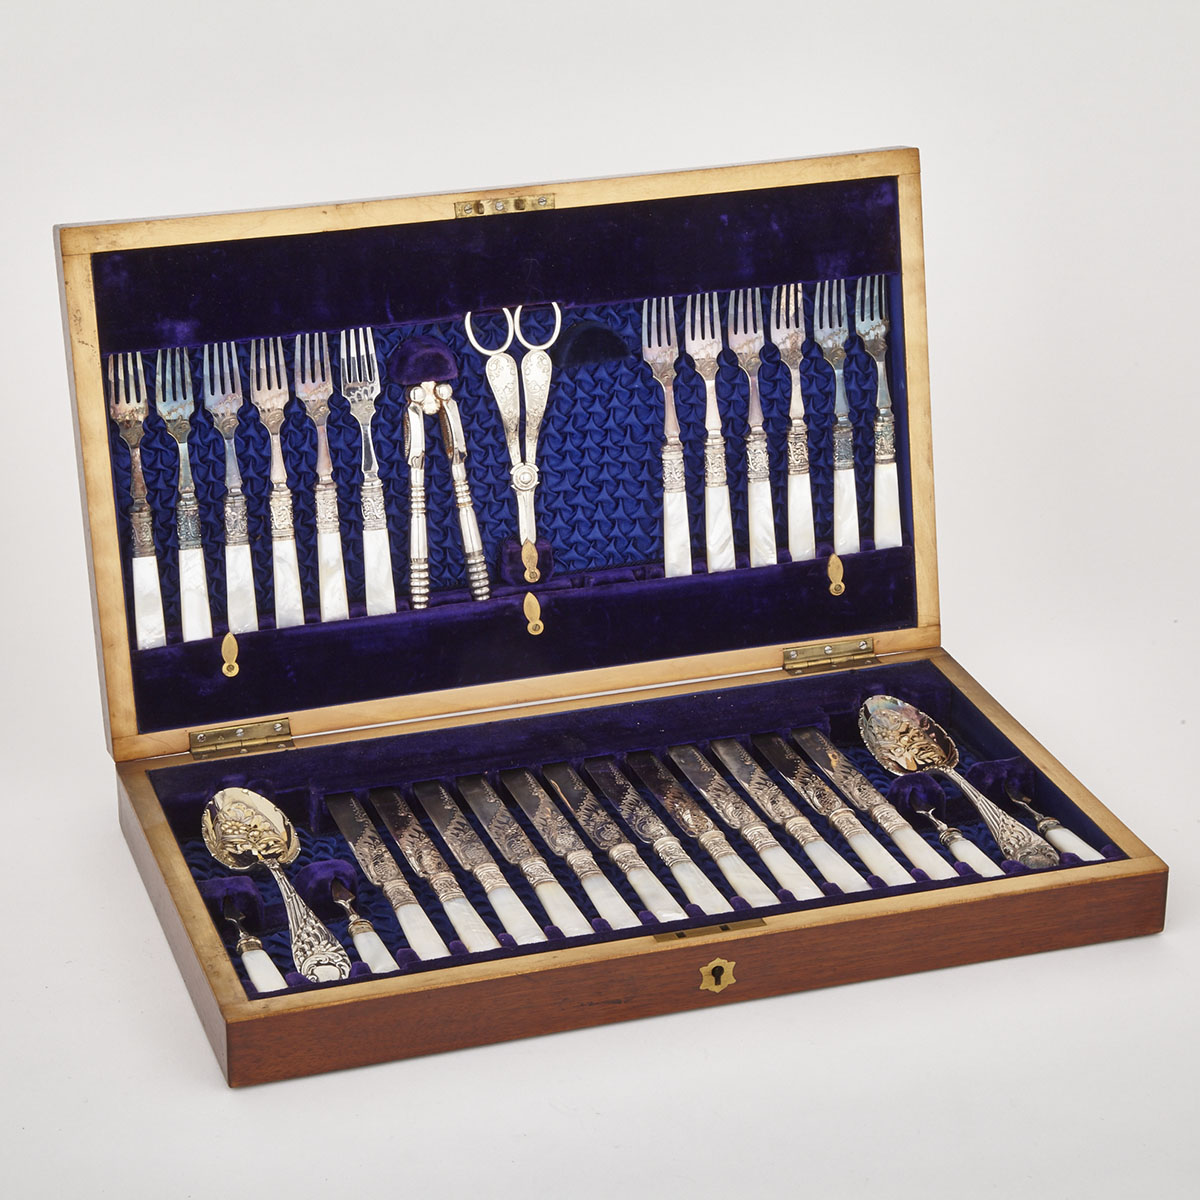 English Silver Plate and Mother-of-Pearl Dessert Flatware Service, John Round & Sons, early 20th century